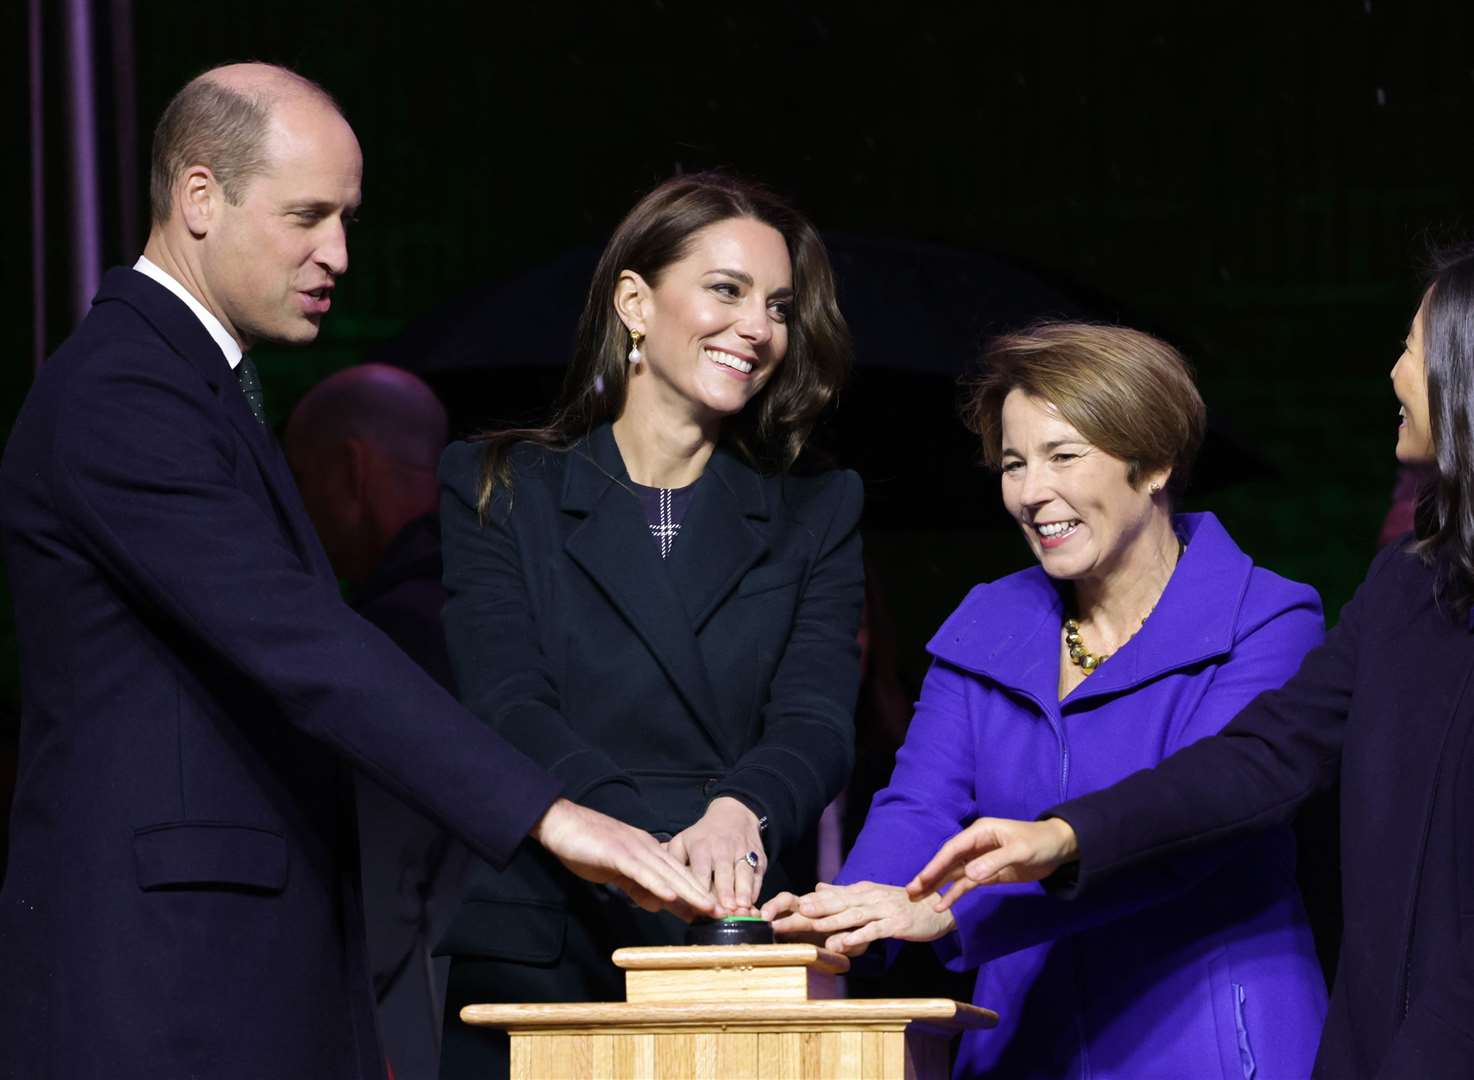 William and Kate’s three-day trip to Boston has been overshadowed by the growing race row engulfing the future King’s godmother (Chris Jackson/PA)